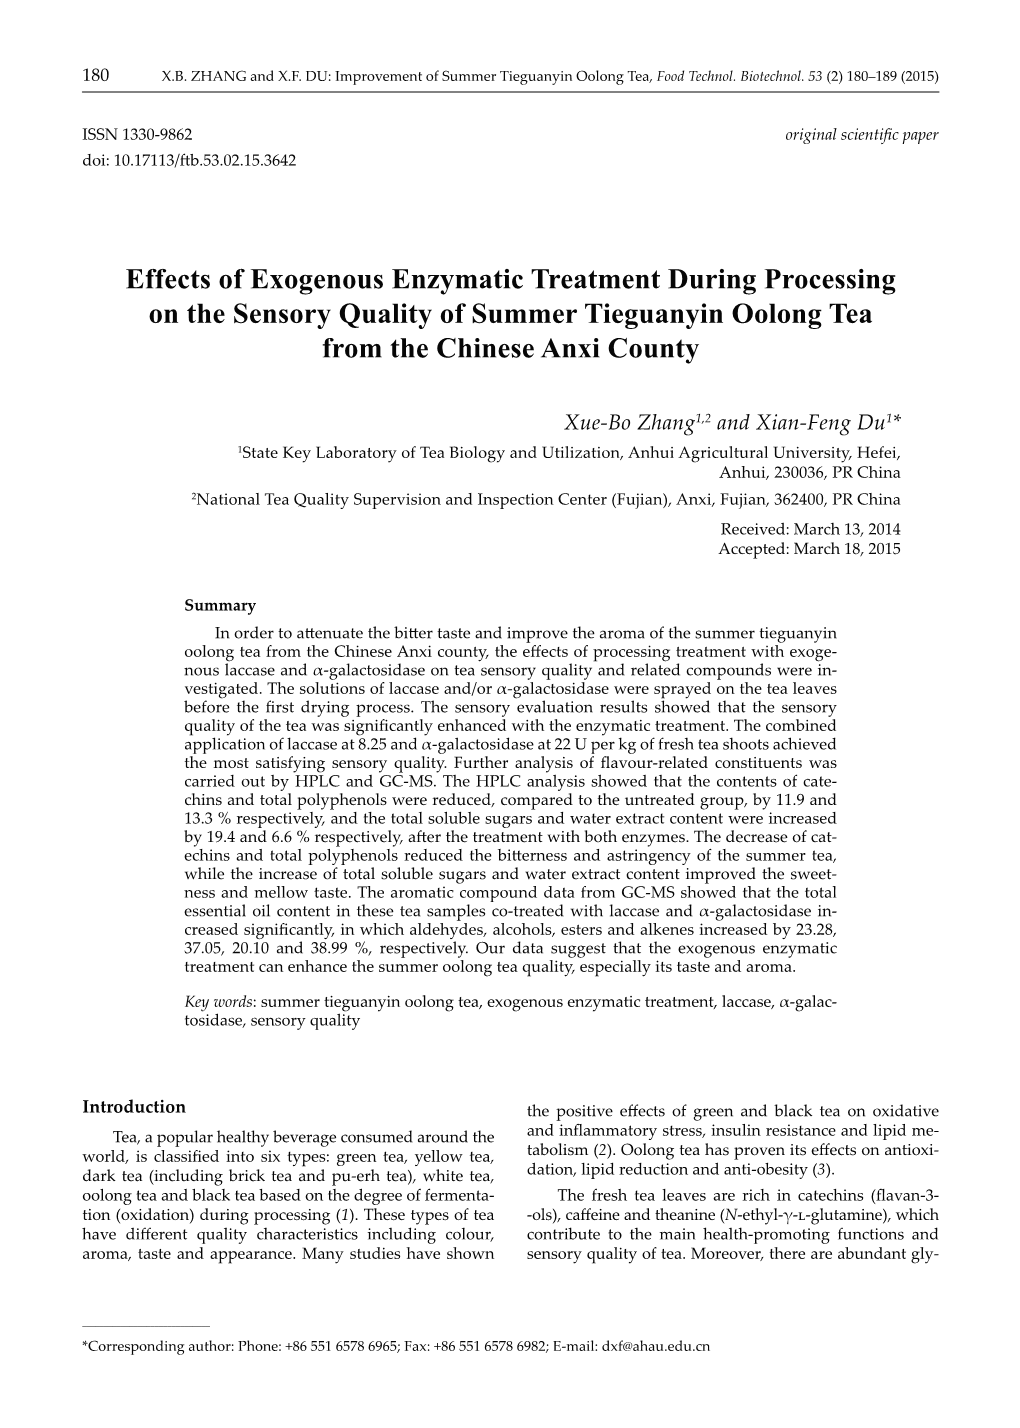 Effects of Exogenous Enzymatic Treatment During Processing on the Sensory Quality of Summer Tieguanyin Oolong Tea from the Chinese Anxi County